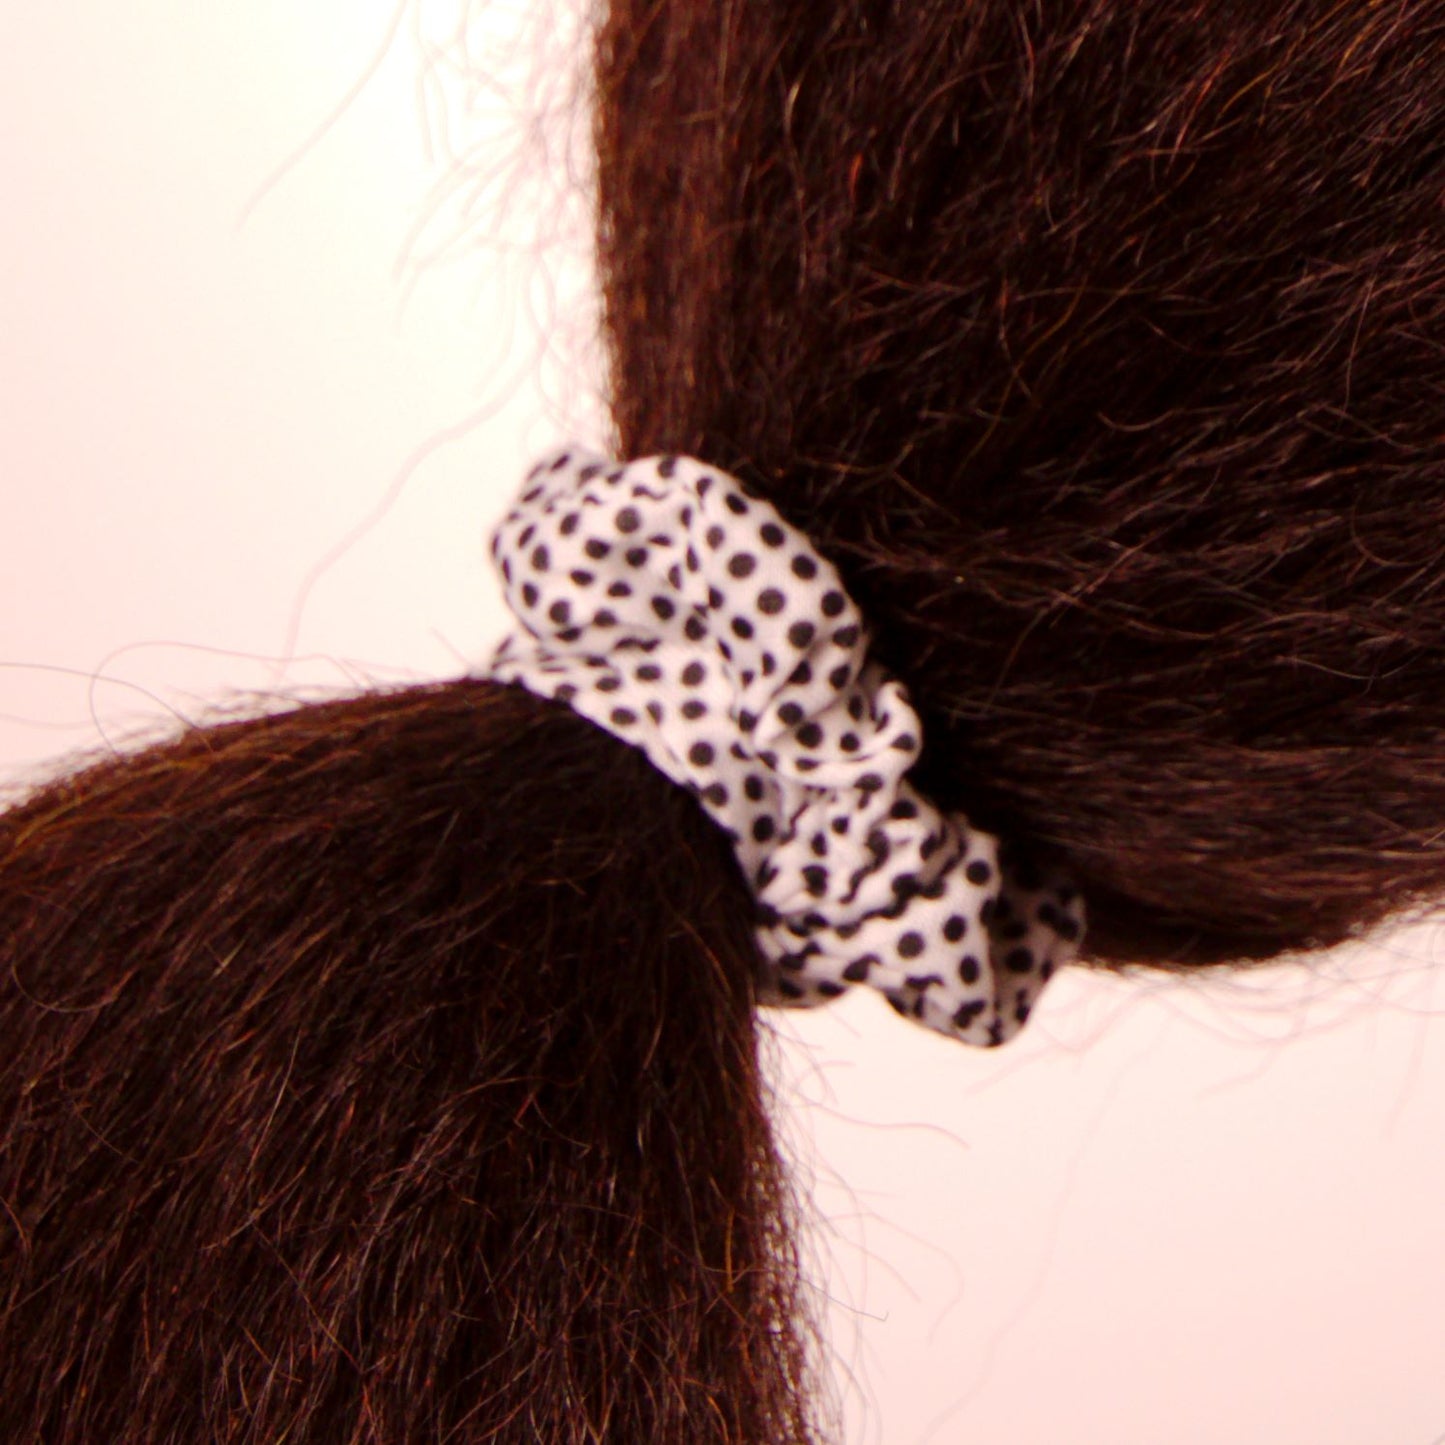 Amelia Beauty, Medium Black White Dot Mix Jersey Scrunchies, 2.5in Diameter, Gentle on Hair, Strong Hold, No Snag, No Dents or Creases. 10 Pack